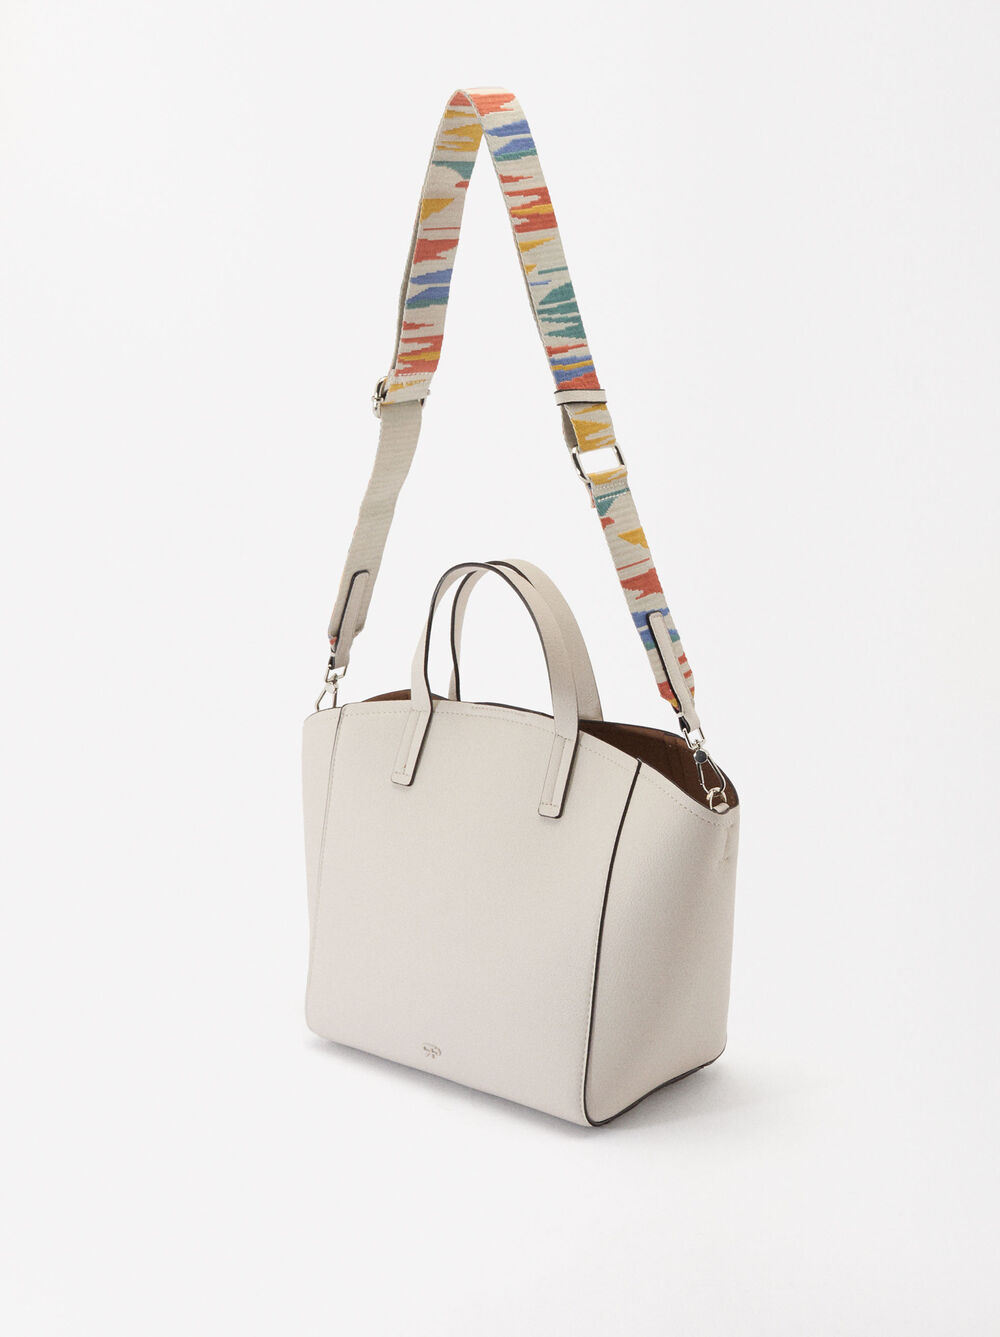 Tote Bag With Interchangeable Straps